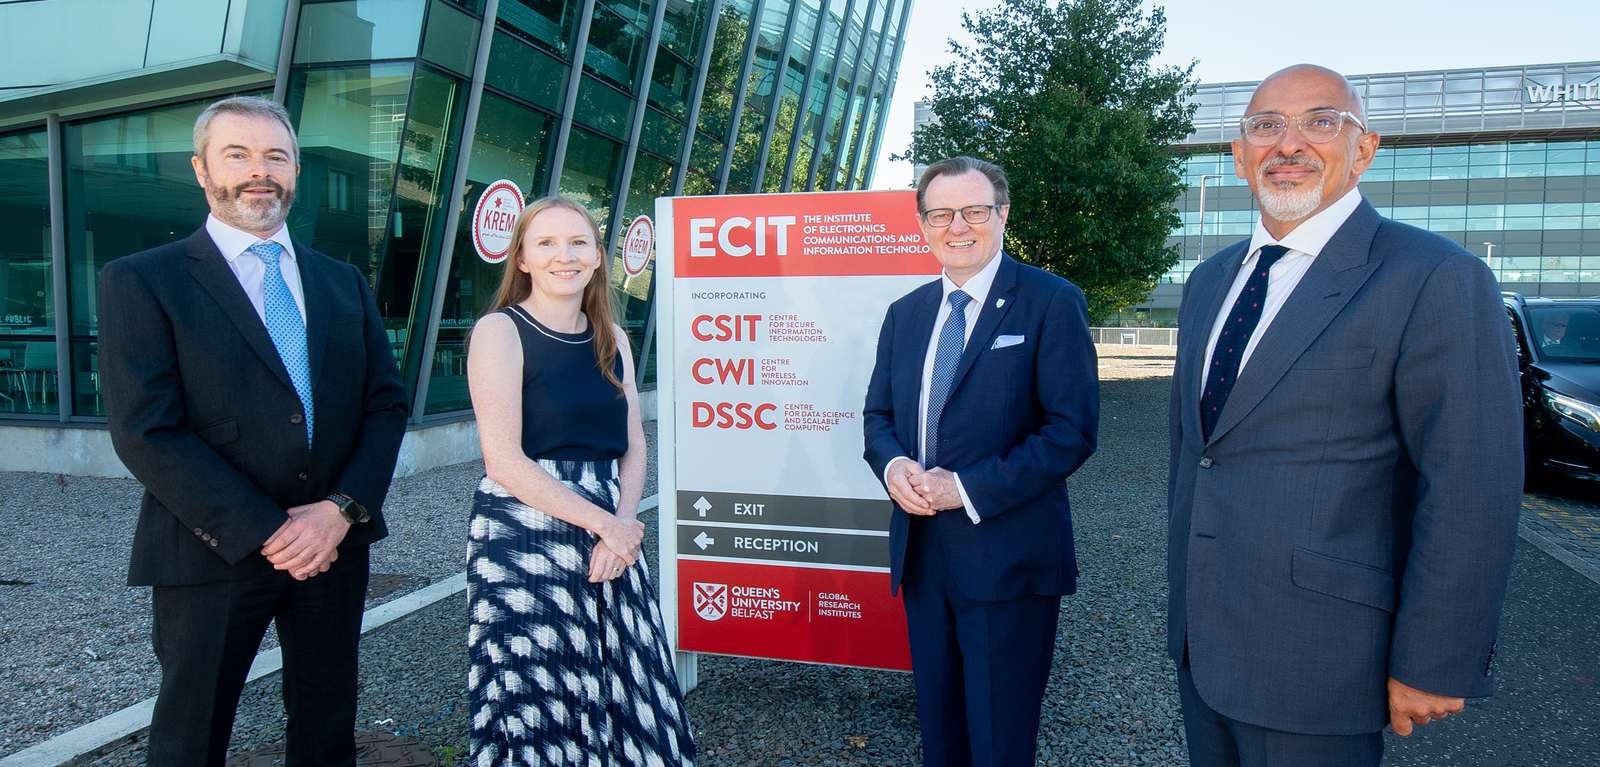 ECIT visit by Chancellor of the Exchequer